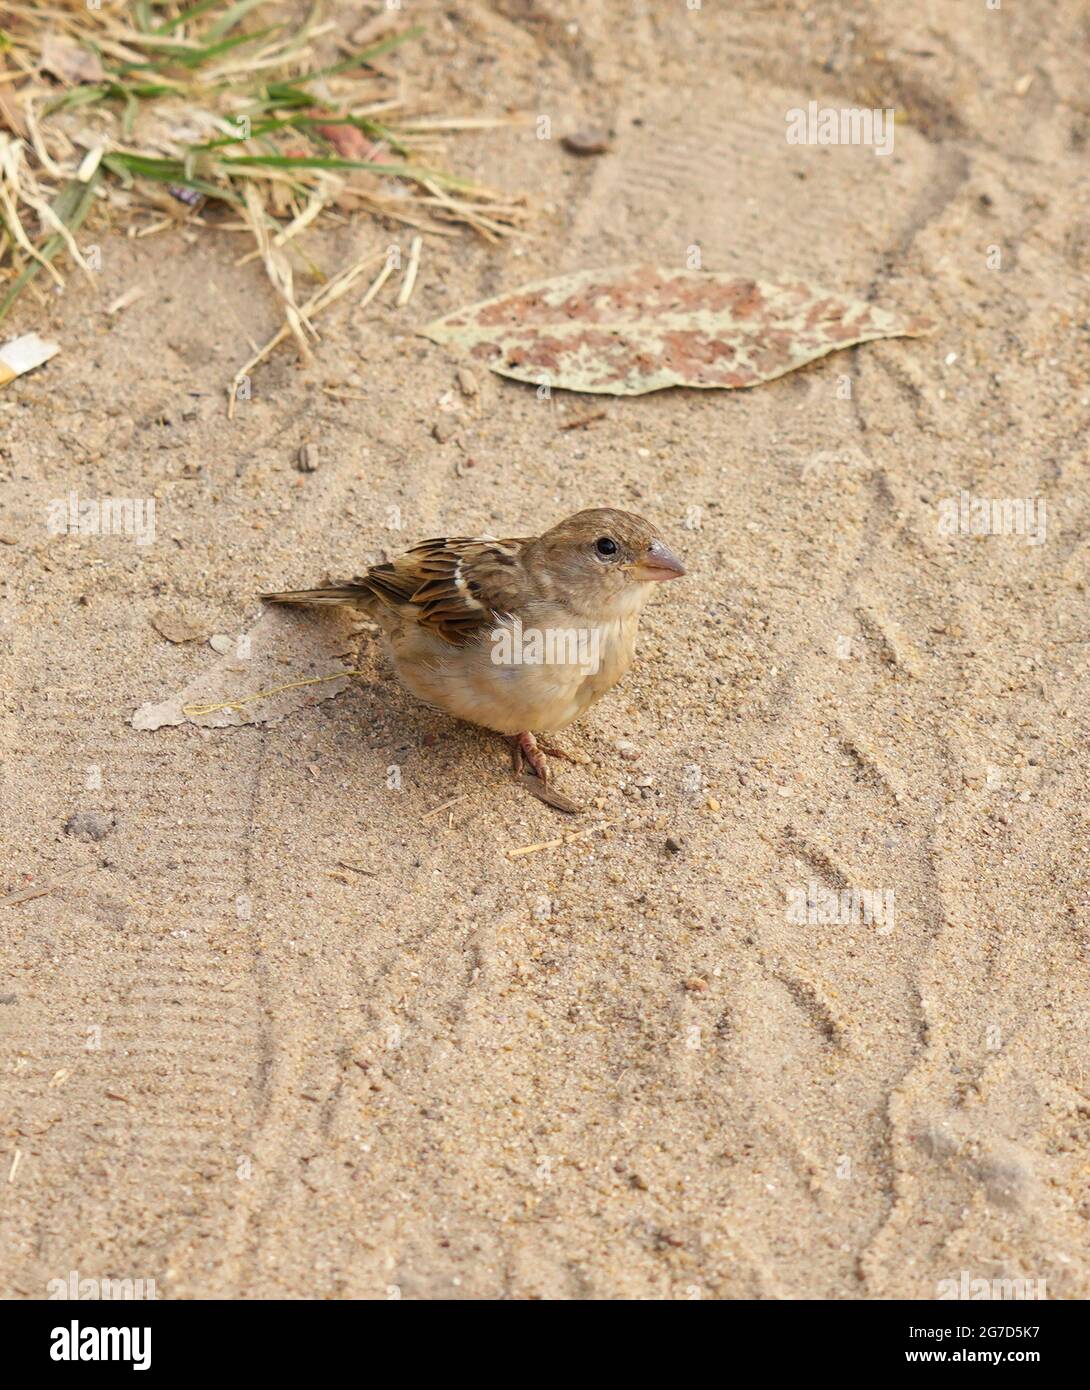 AN ISOLATED PASSER DOMESTICUS OR COMMON SPARROW  ON A SAND BED SEARCHING FOR FOOD. Stock Photo